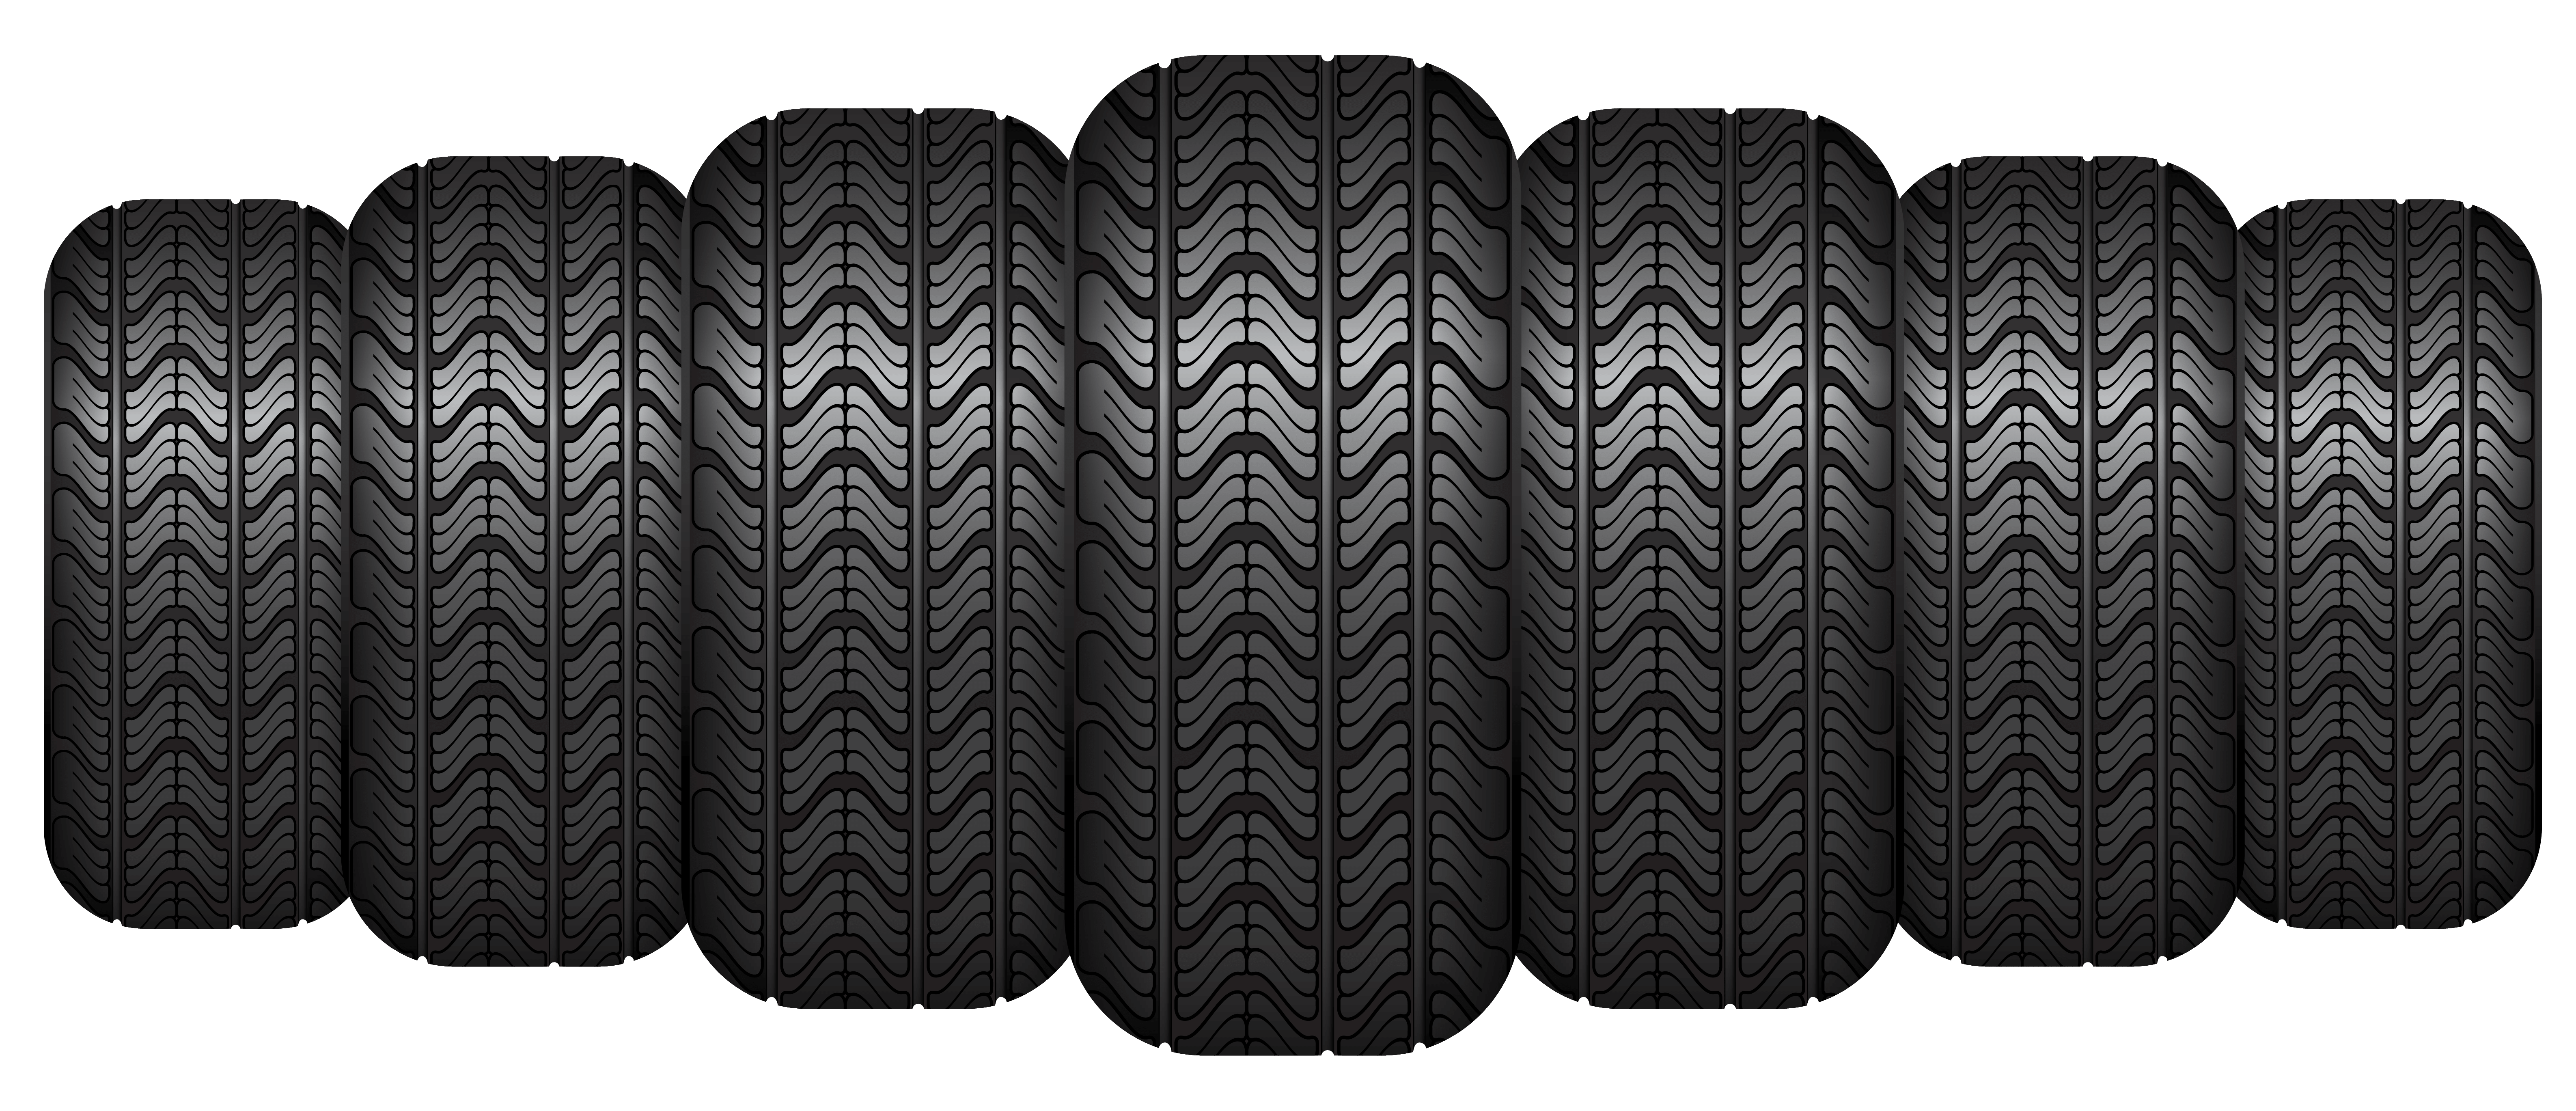 Wheel clipart stacked tire. Wheelandwheels d alignment automated